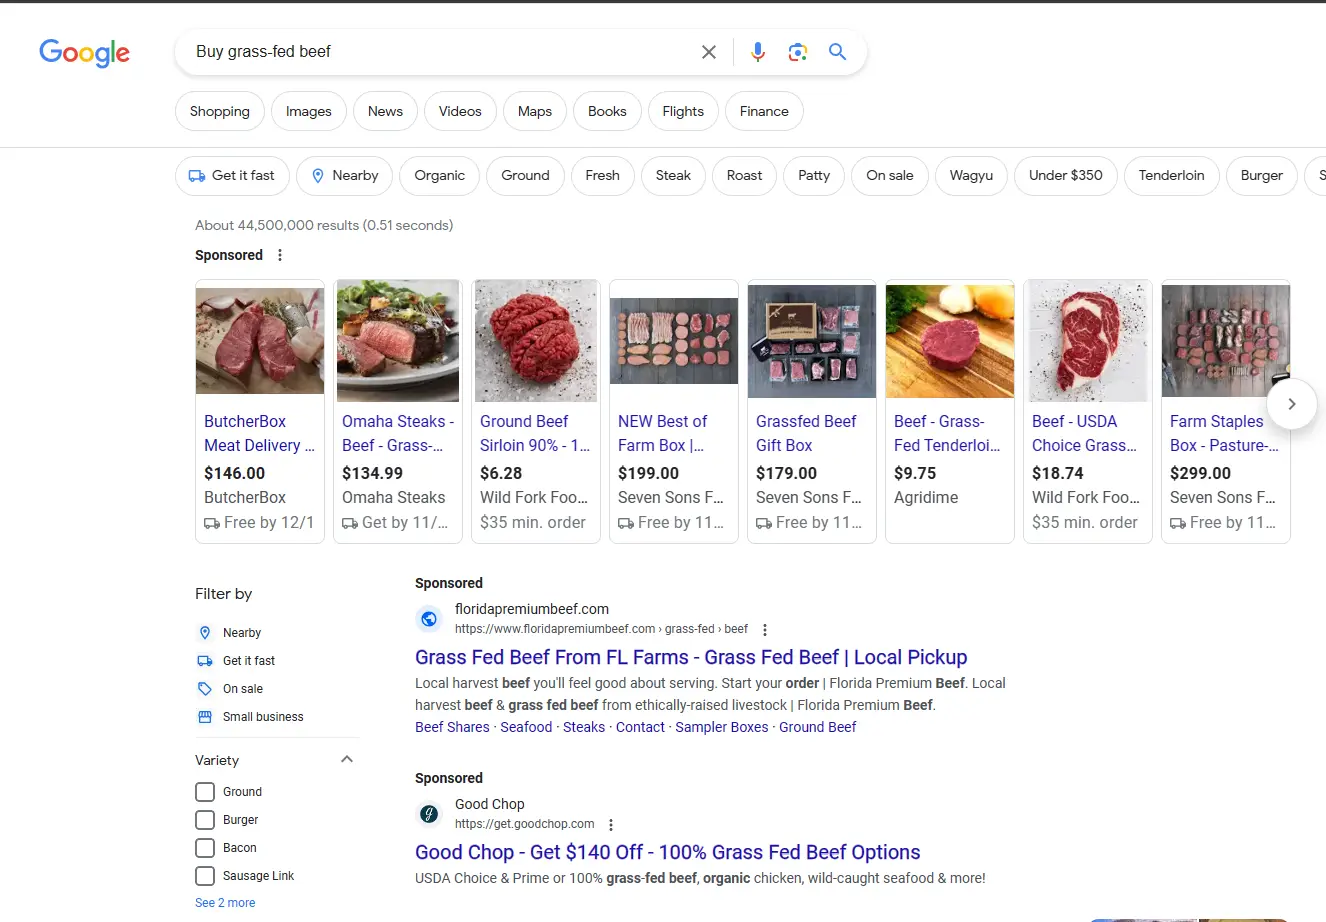 How transactional intent SERPs look example